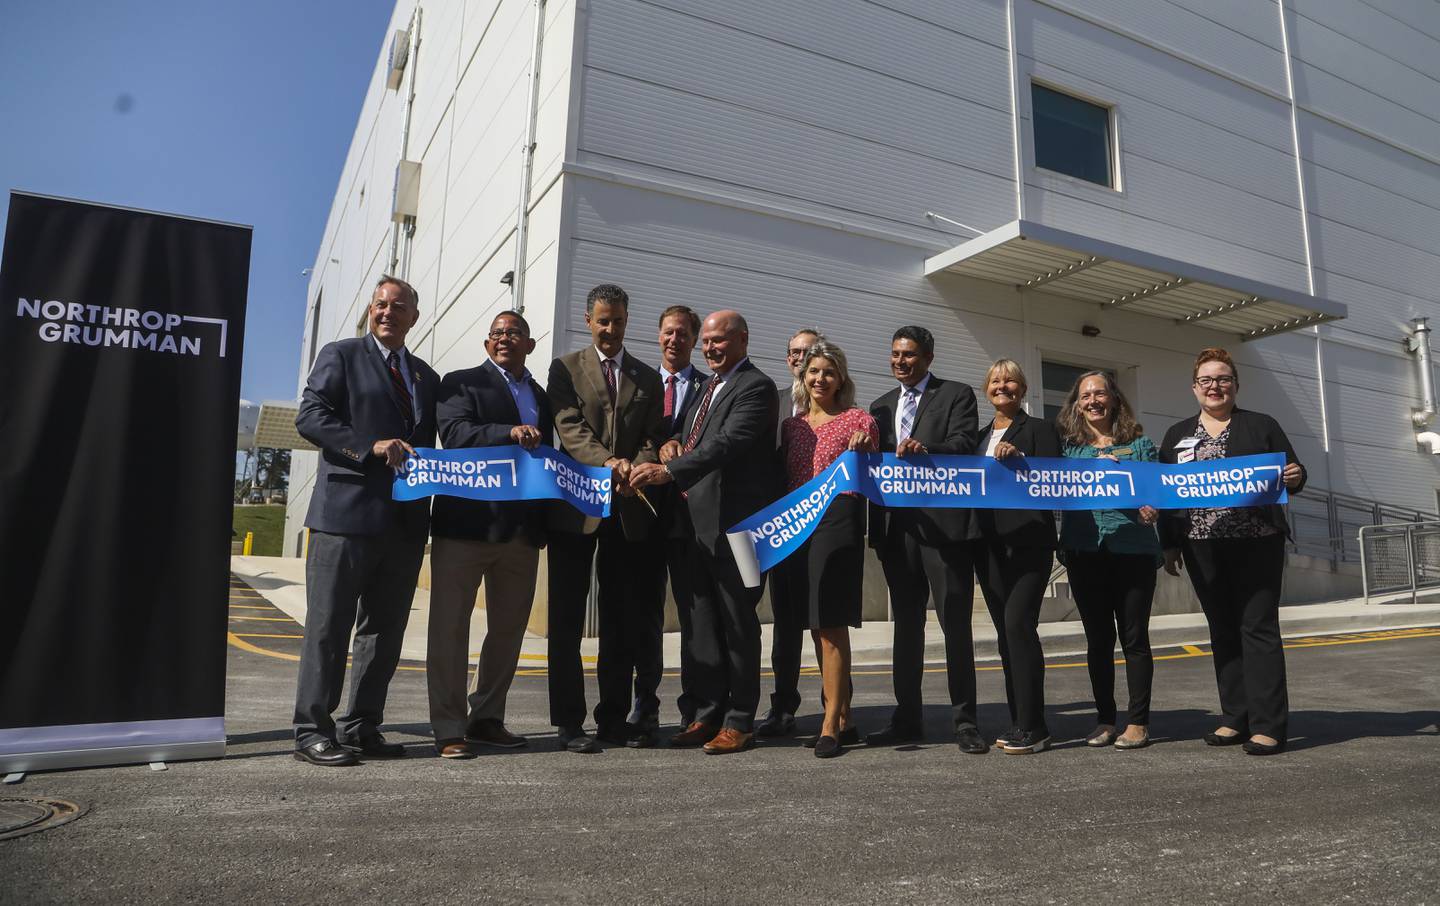 Northrop Grumman celebrated the ribbon cutting of its brand new Maryland Space Assembly & Test 2 (MSAT2) building on September 19, 2022.